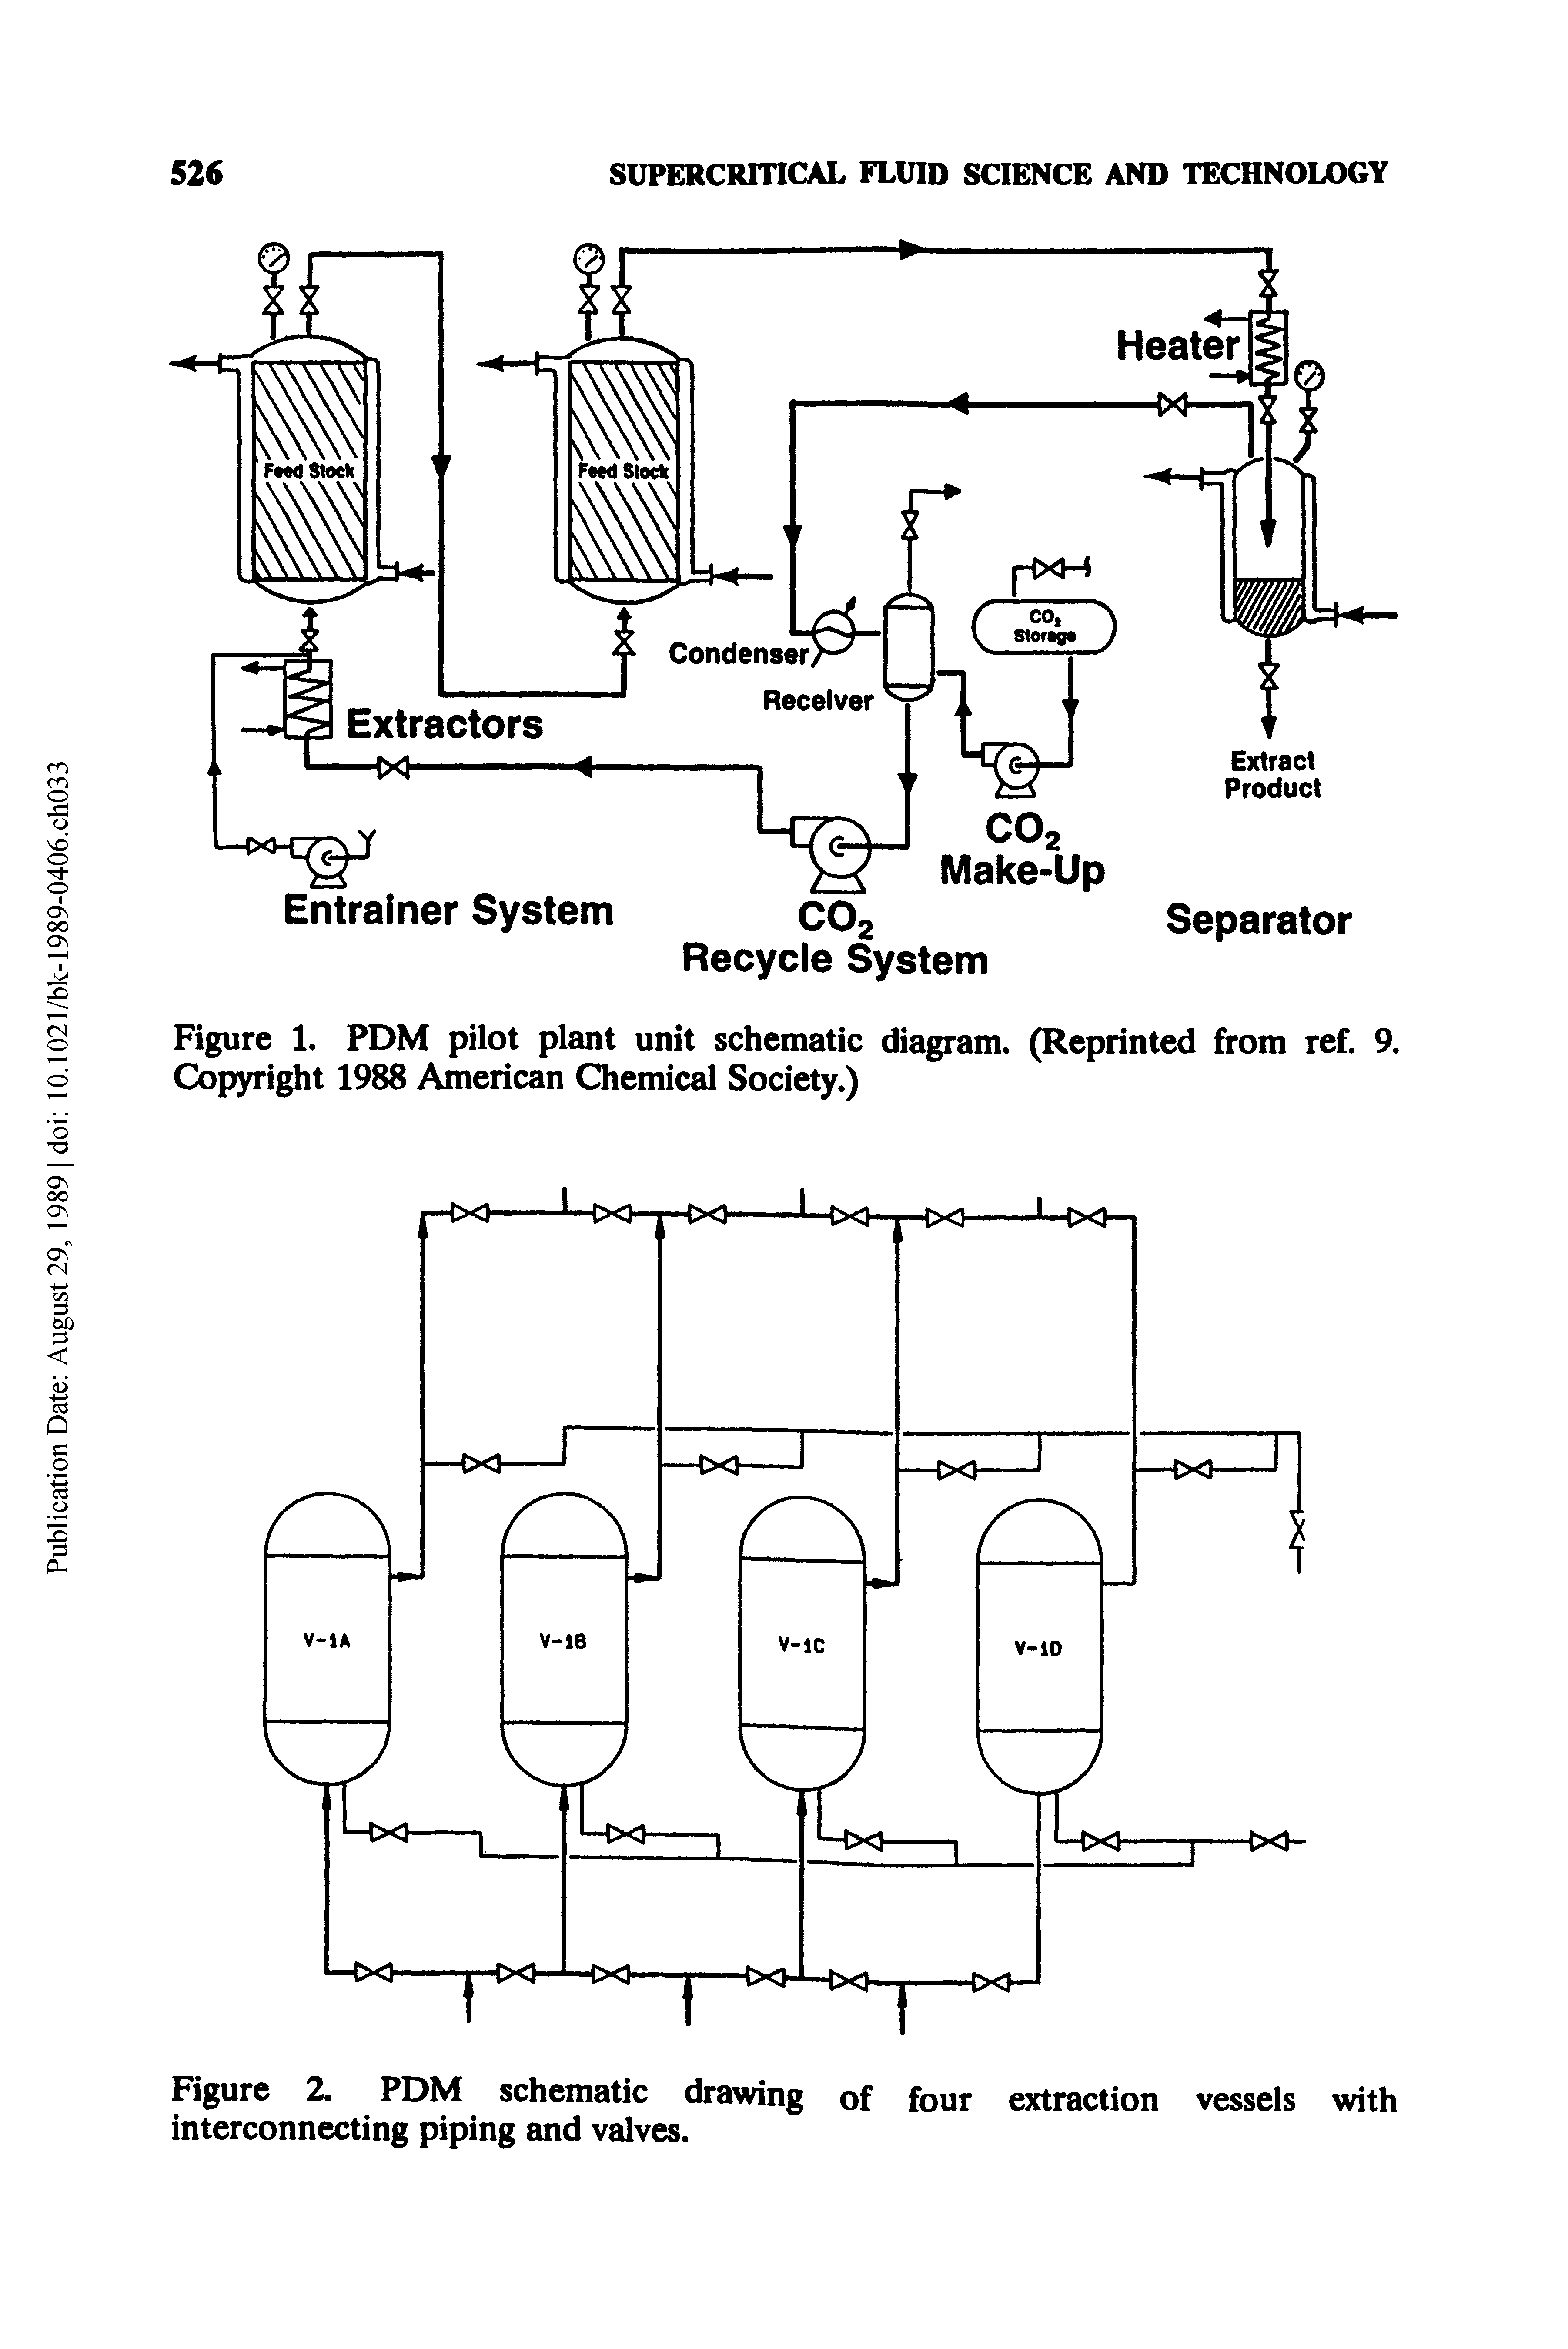 Figure 1. PDM pilot plant unit schematic diagram. (Reprinted from ref. 9. Copyright 1988 American Chemical Society.)...